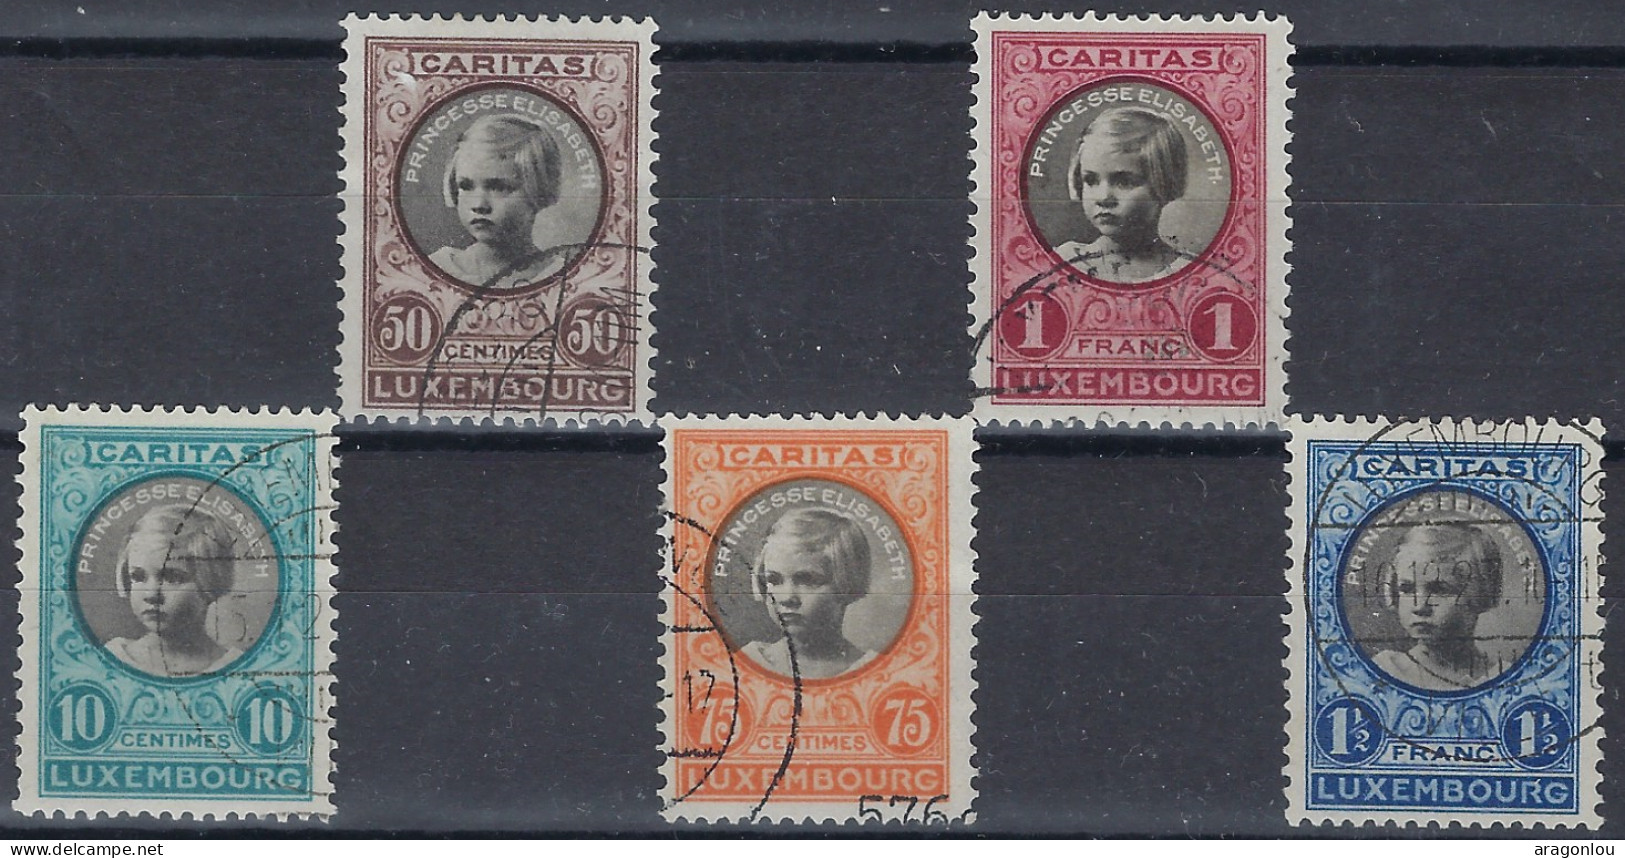 Luxembourg - Luxemburg - Timbres  1927  Série    Princesse  Elisabeth    Caritas °   VC.34,- - Used Stamps